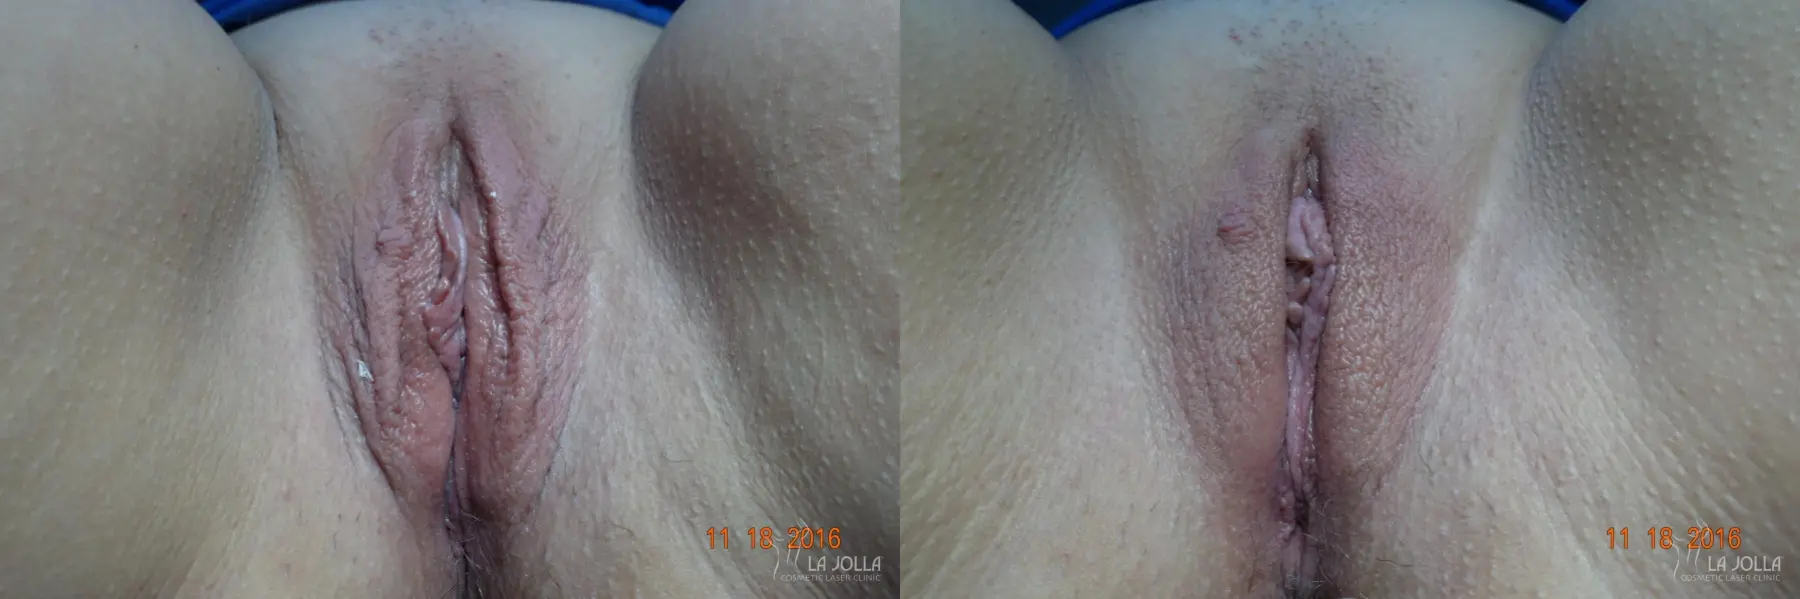 ThermiVa®: Patient 3 - Before and After  